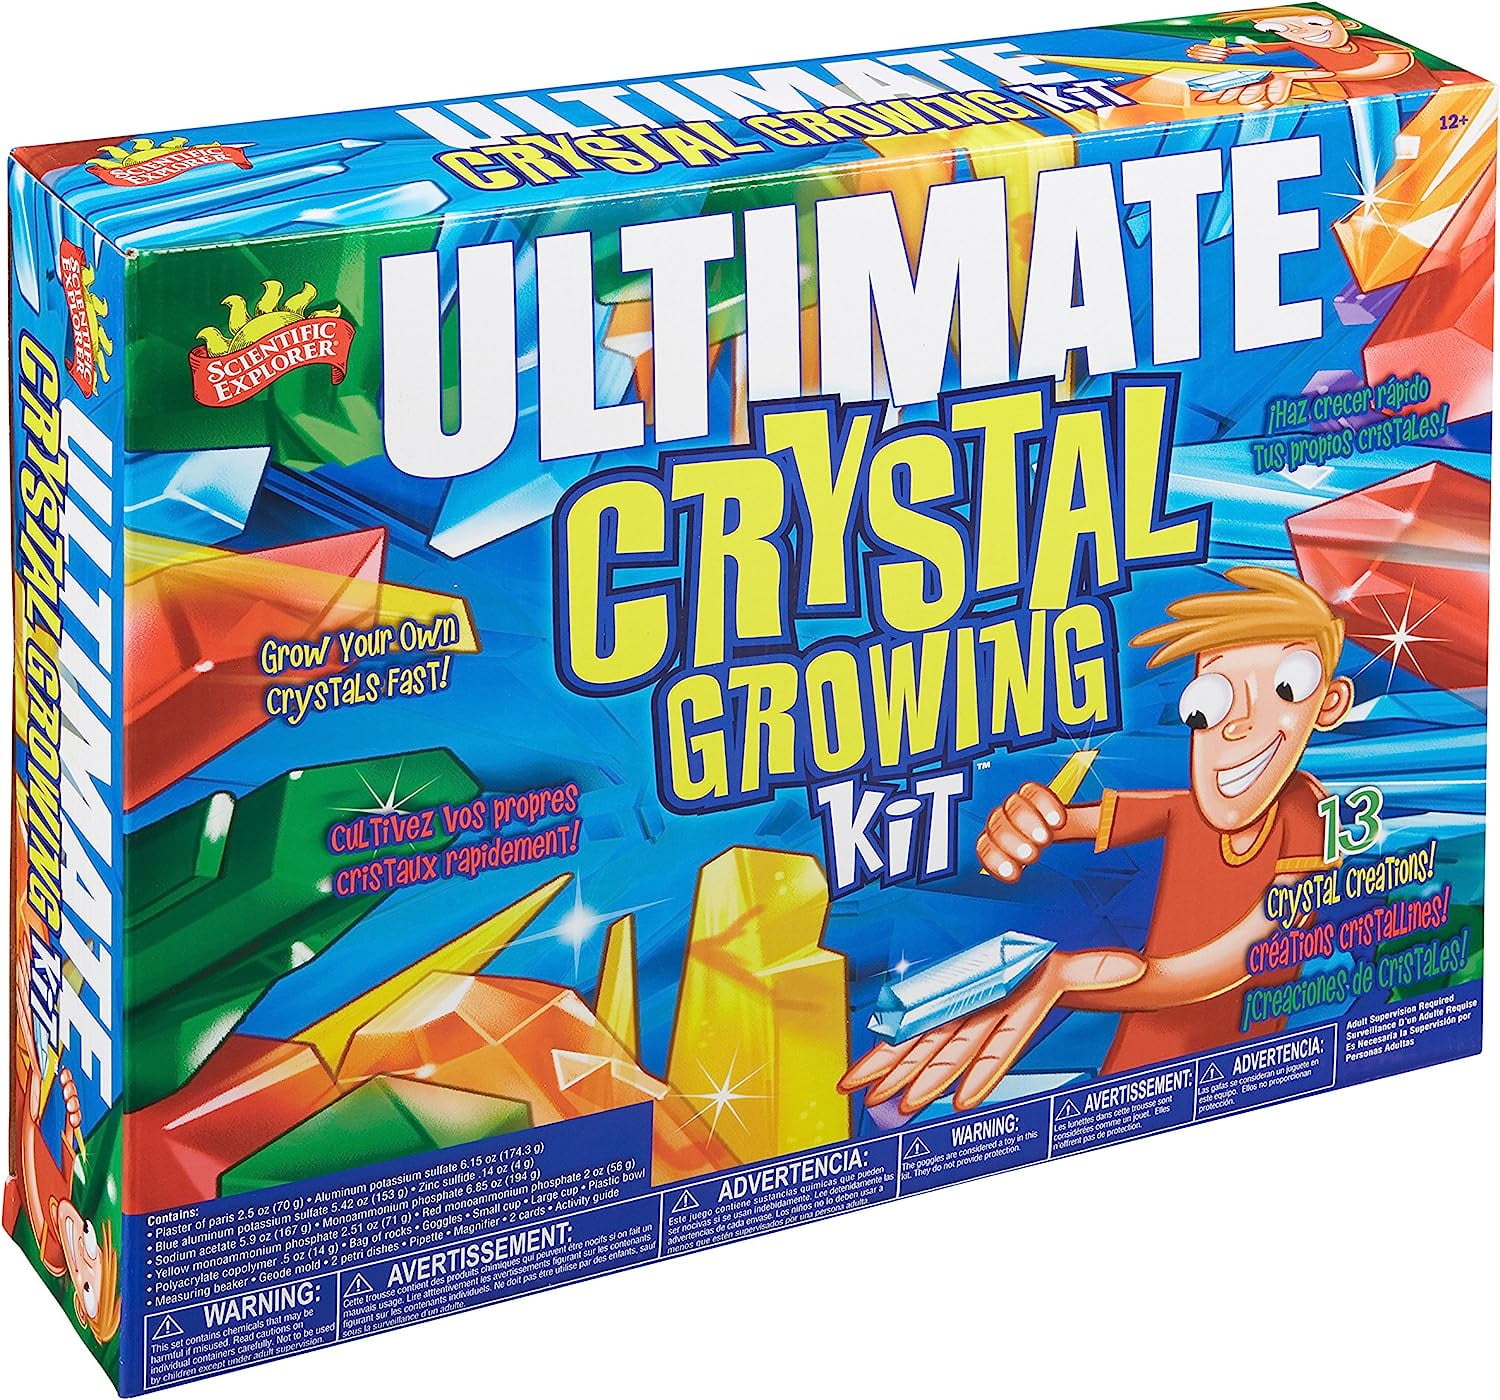 4M Green Science Grow-A-Maze Kit, Build A Plant Maze Science Kit, For Boys  & Girls Ages 5+